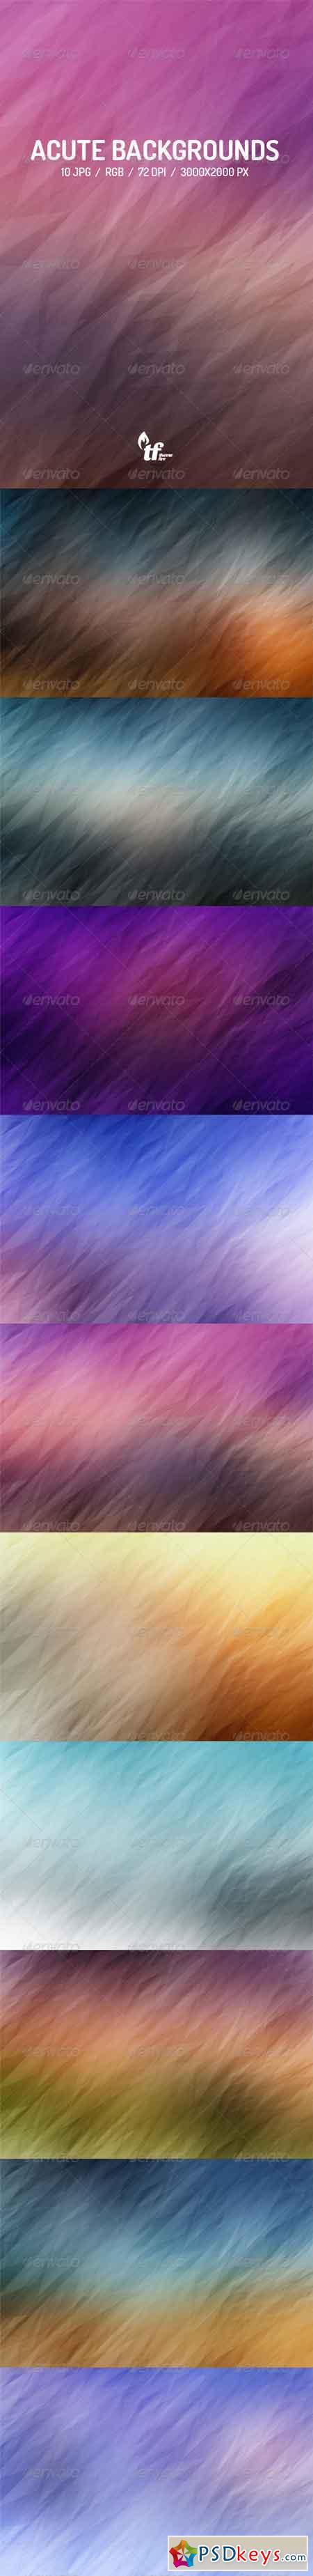 10 Acute Backgrounds 8454199